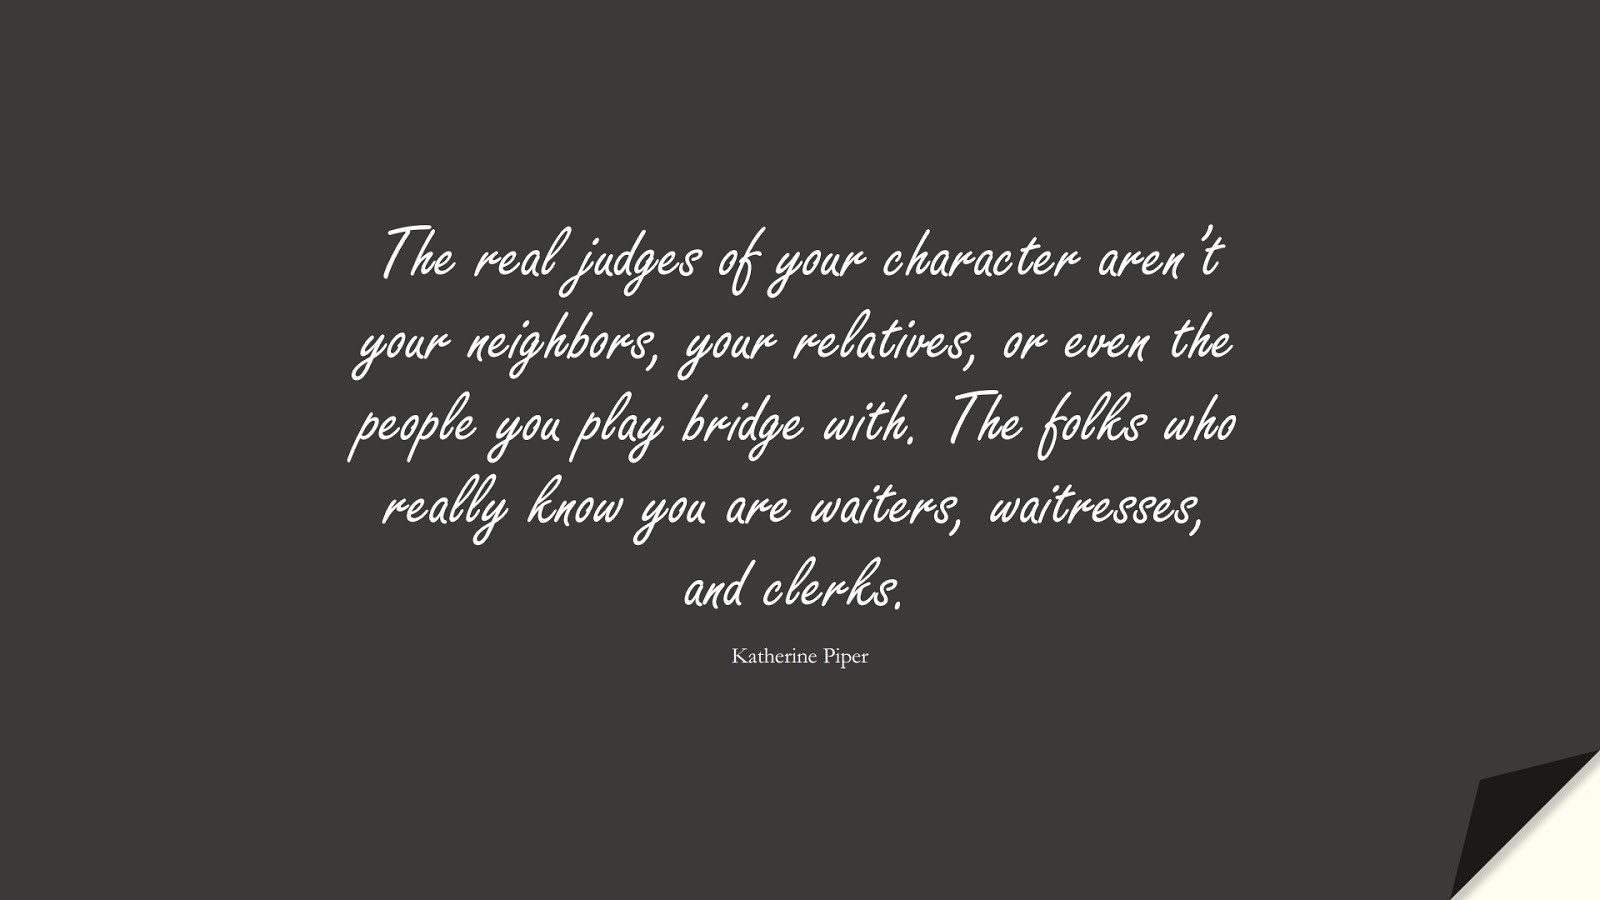 The real judges of your character aren’t your neighbors, your relatives, or even the people you play bridge with. The folks who really know you are waiters, waitresses, and clerks. (Katherine Piper);  #InspirationalQuotes